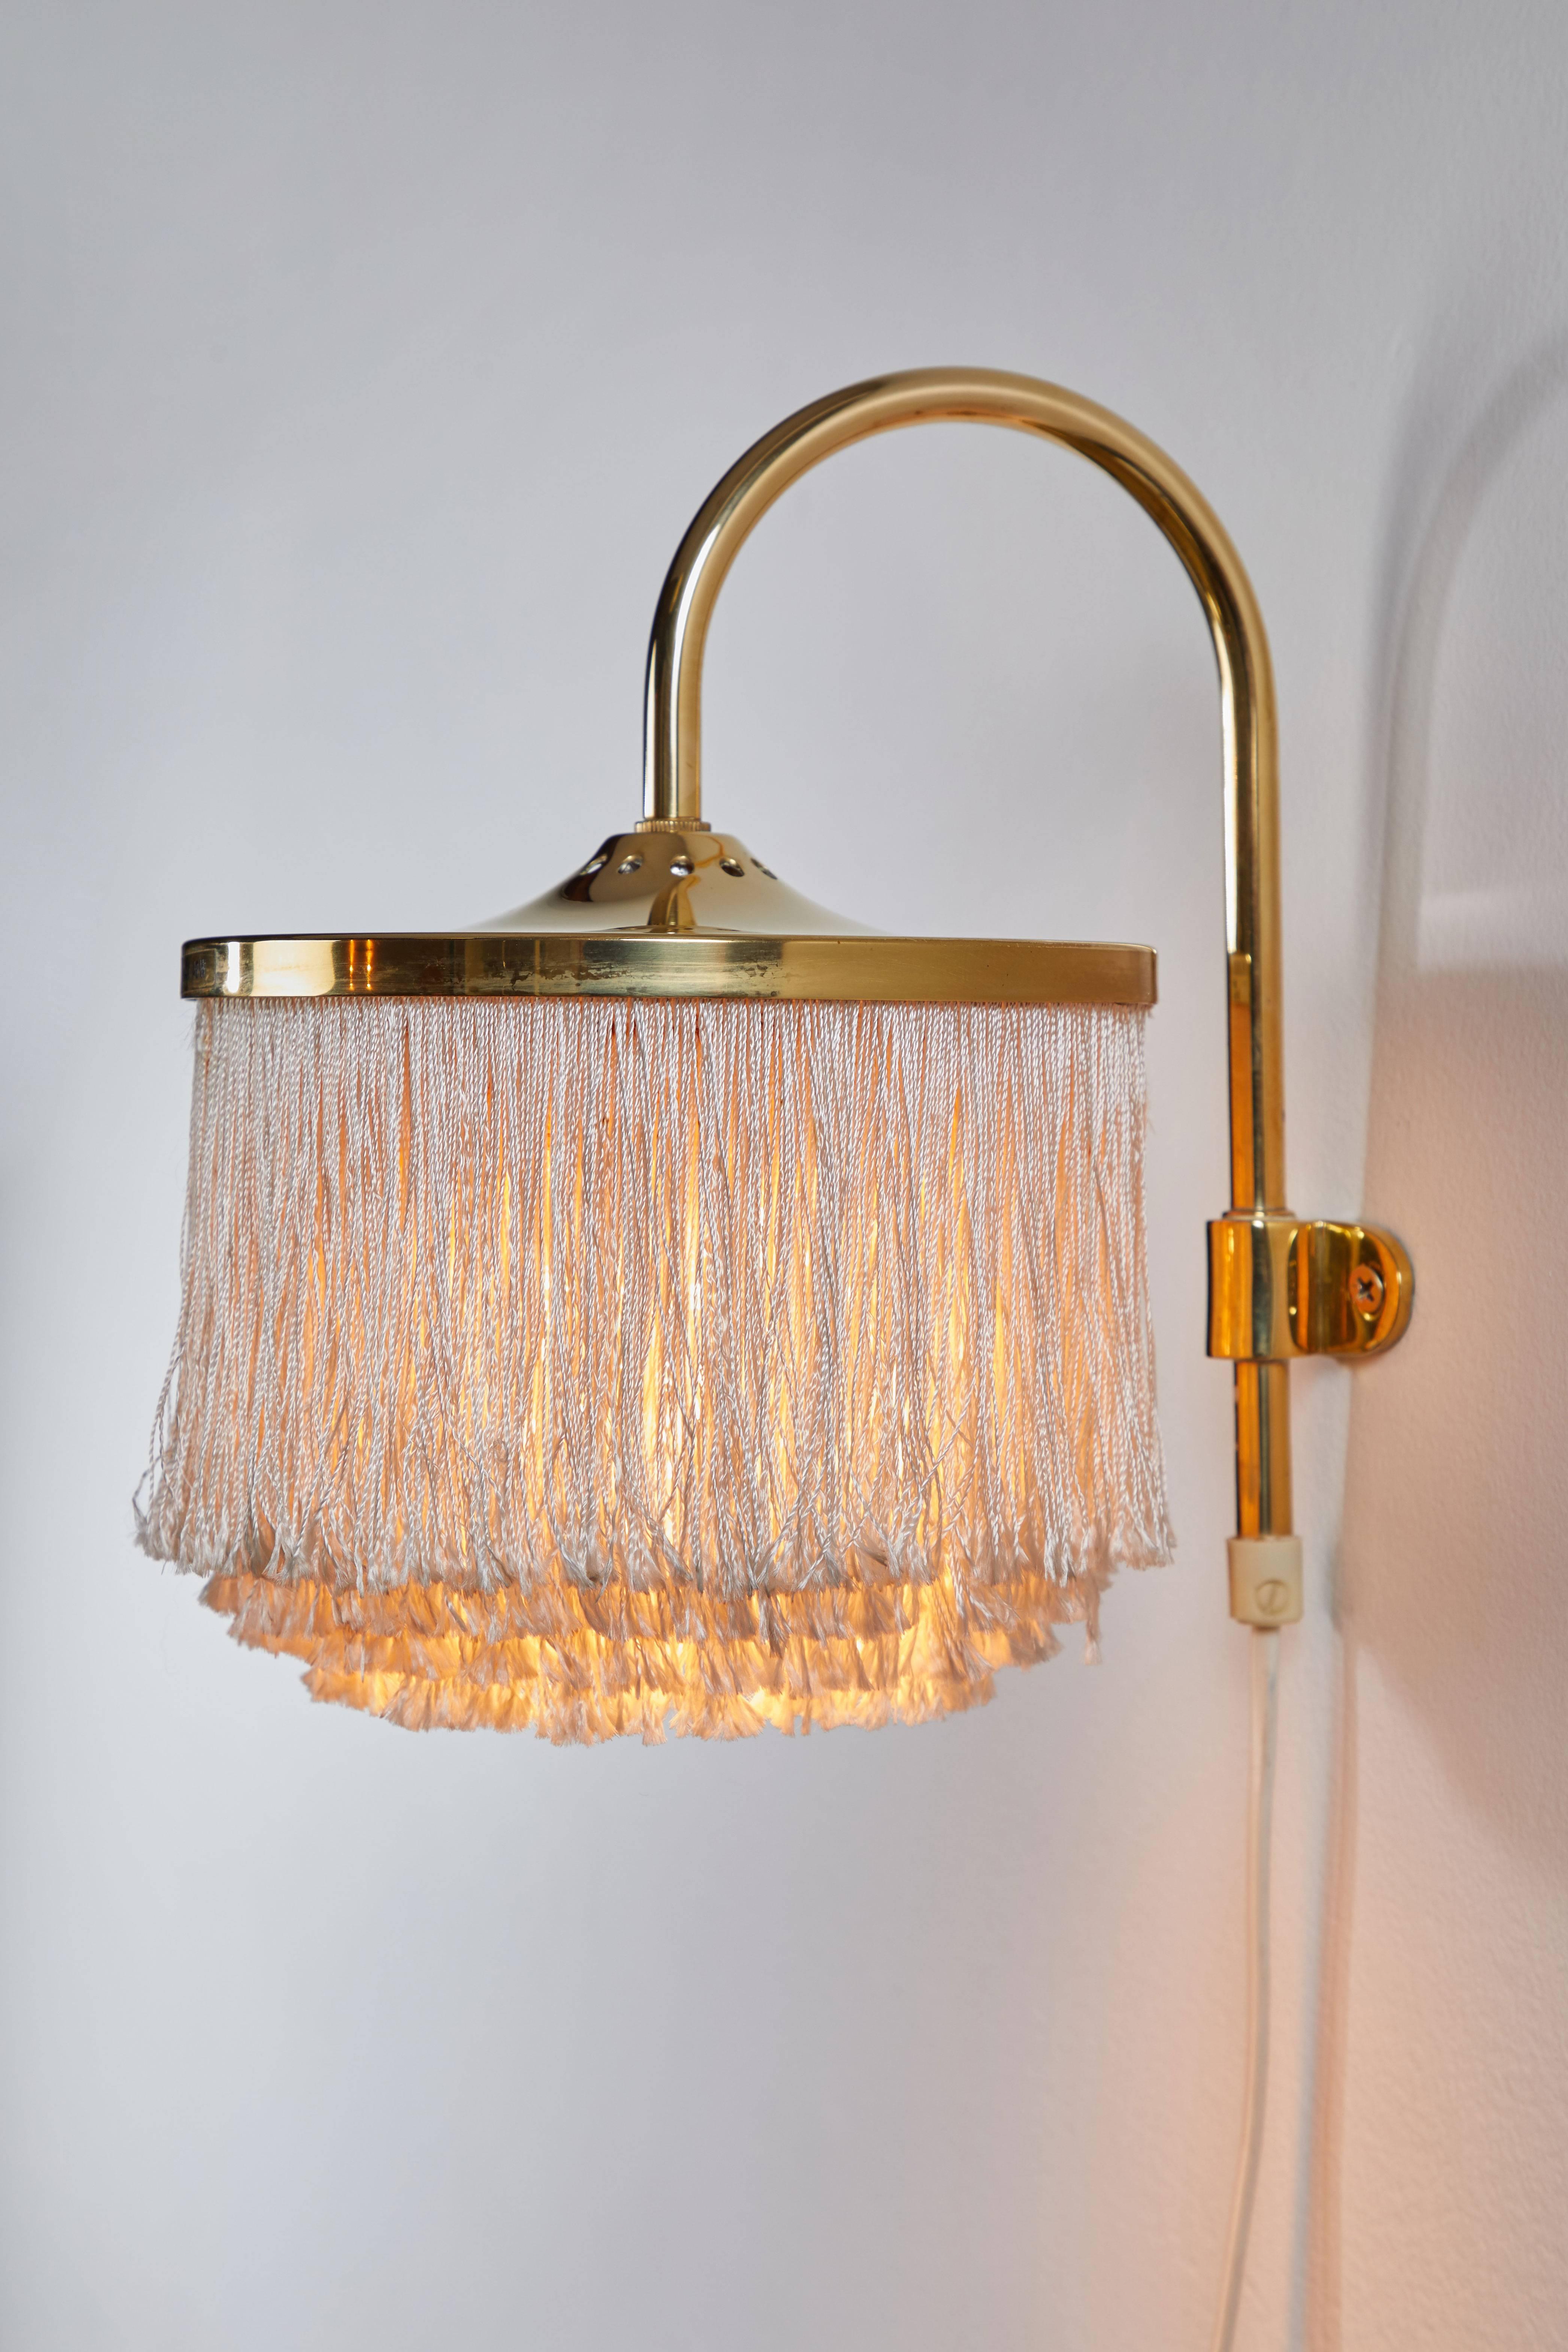 Brass and silk cord fringe wall light by Hans-Agne Jakobsson, Markaryd. Designed in Sweden, circa 1950s. Original cord and plug. Takes one E27 60w maximum bulb.